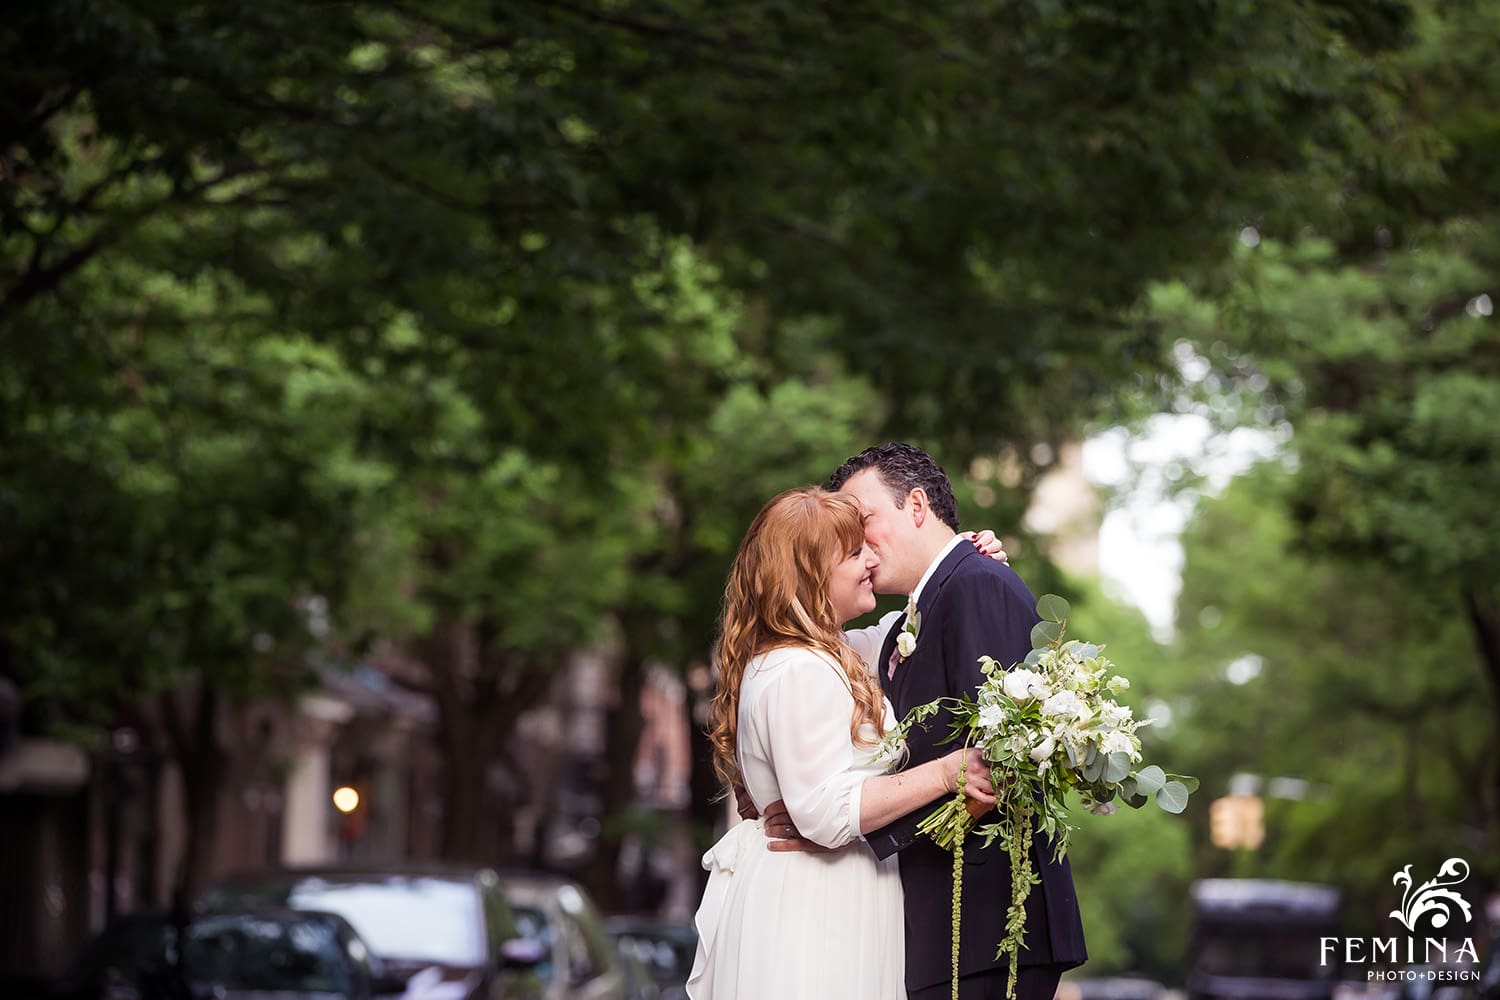 Wedding Photography at The Standard East Village